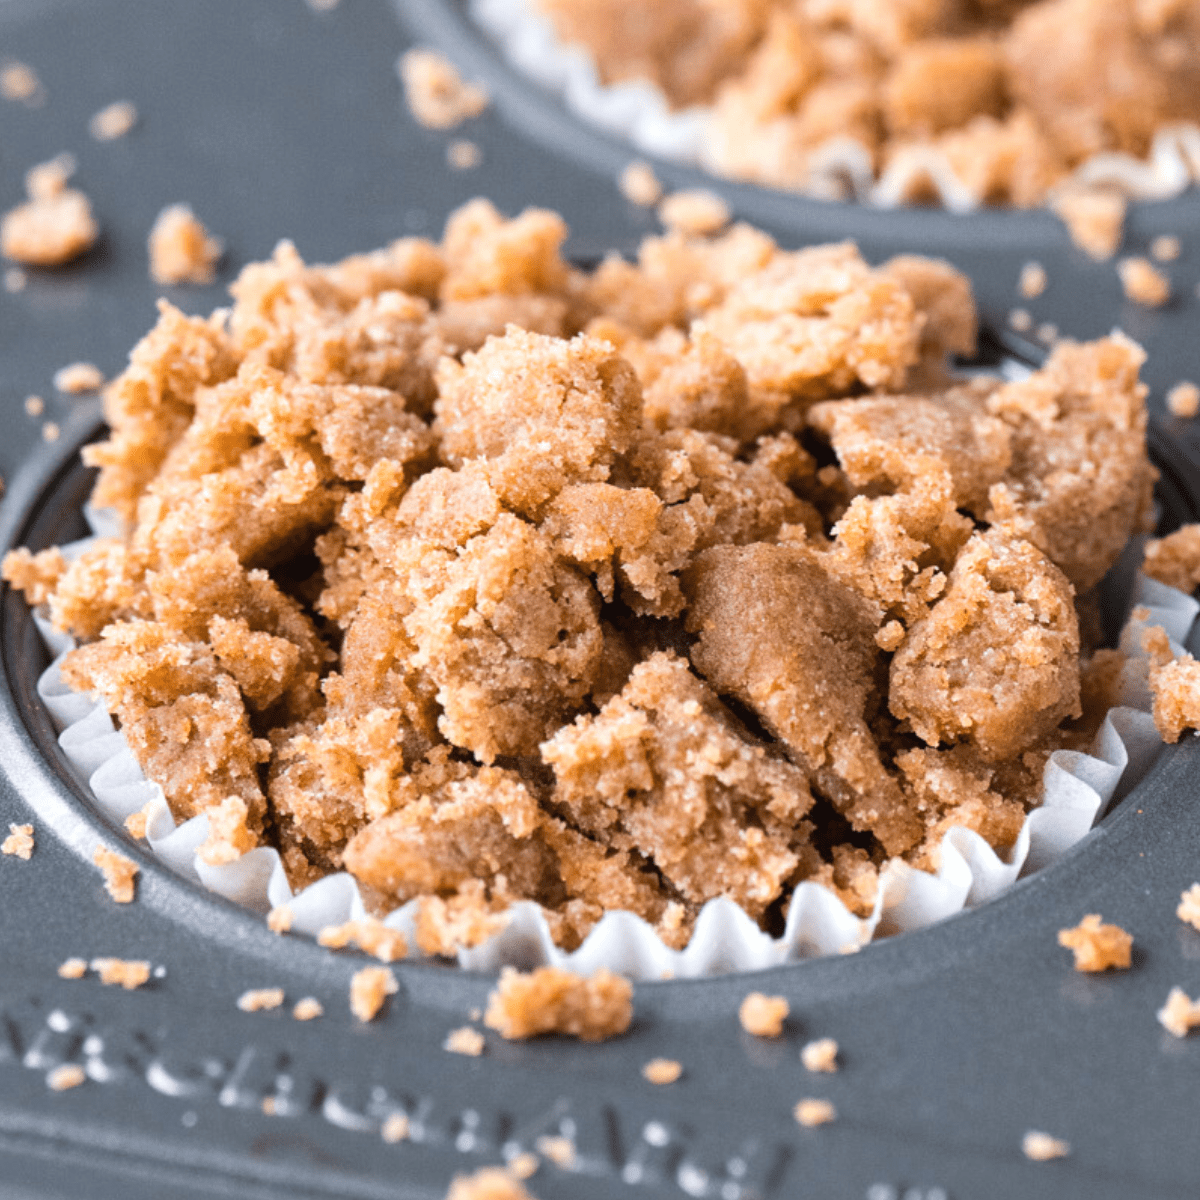 How To Make Crumb Topping - The First Year Blog